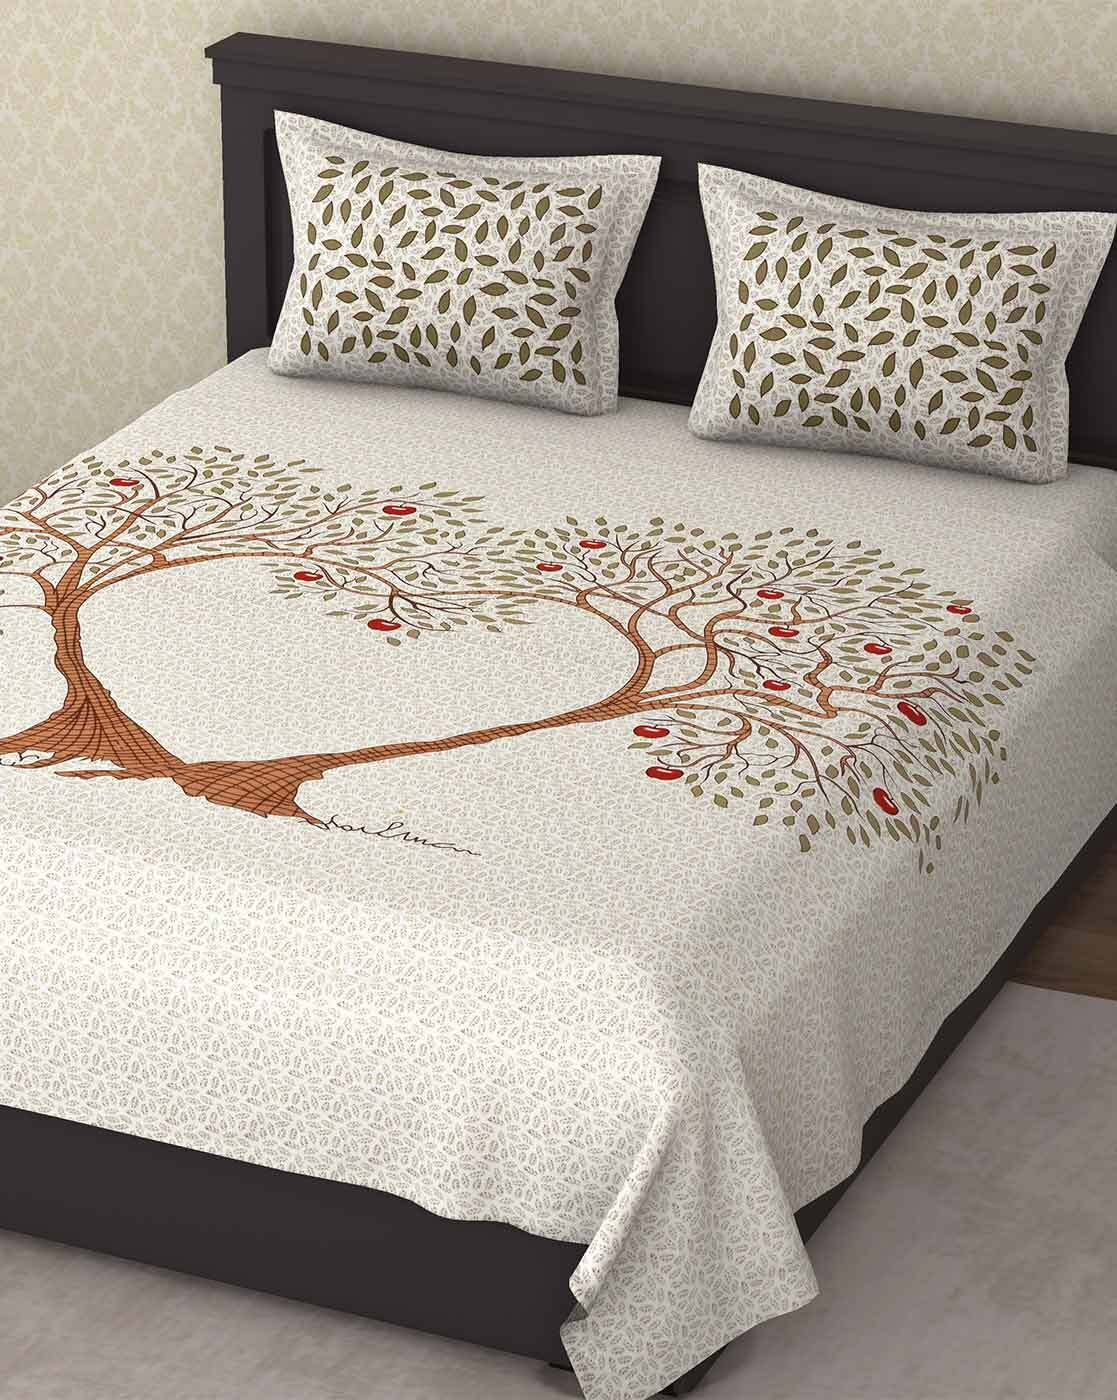 Brown Bedsheets For Home Kitchen, Bed Sheets For King Size